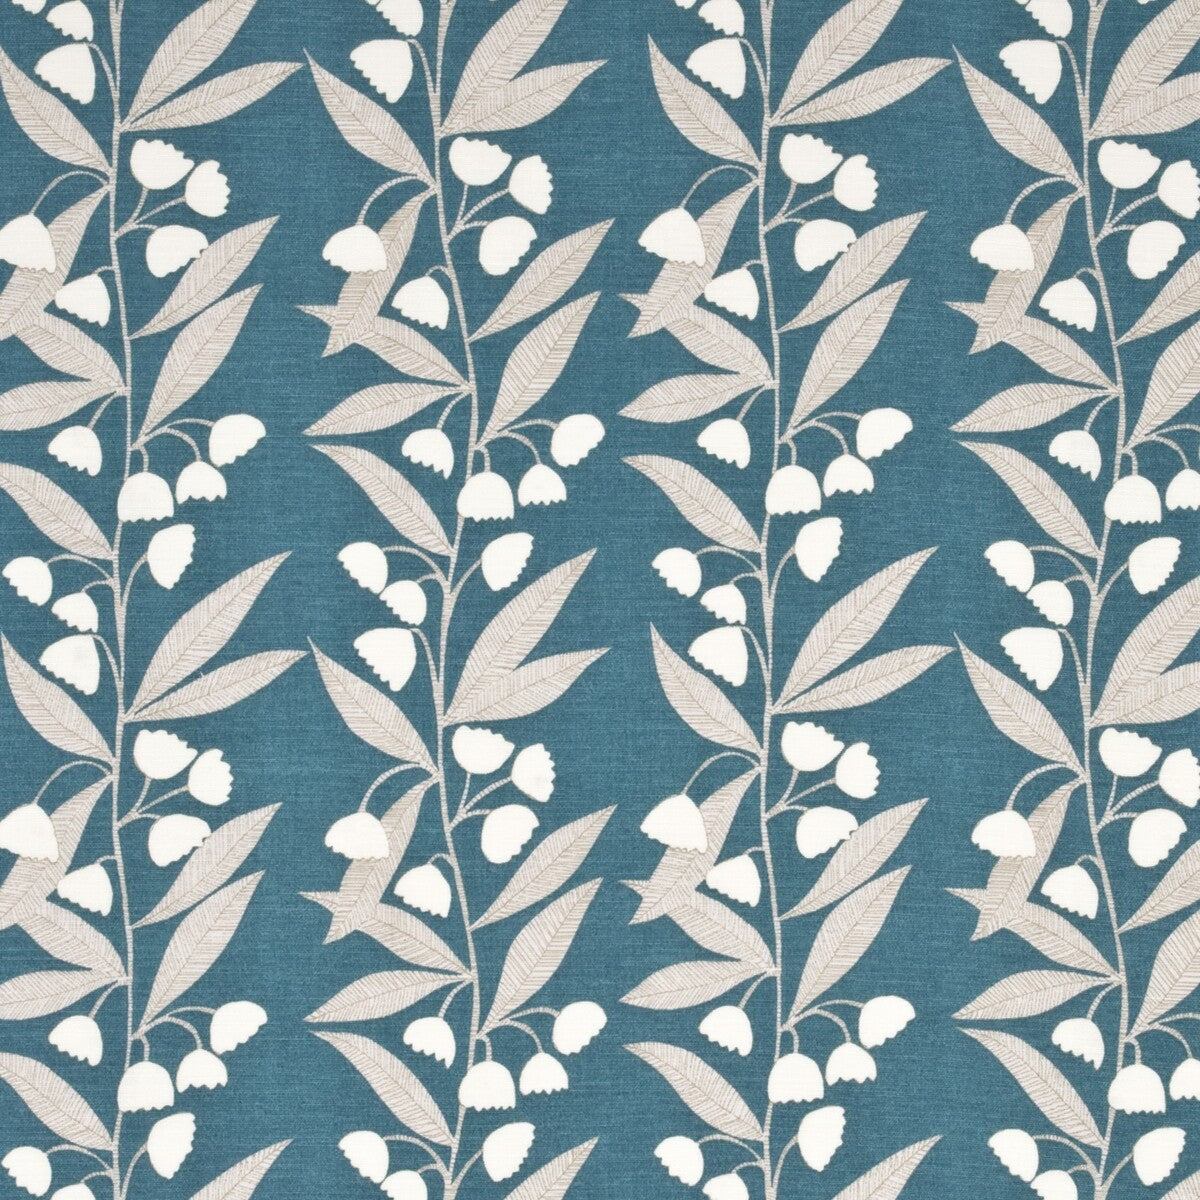 Bell Flower fabric in teal color - pattern PP50361.3.0 - by Baker Lifestyle in the Homes &amp; Gardens II collection